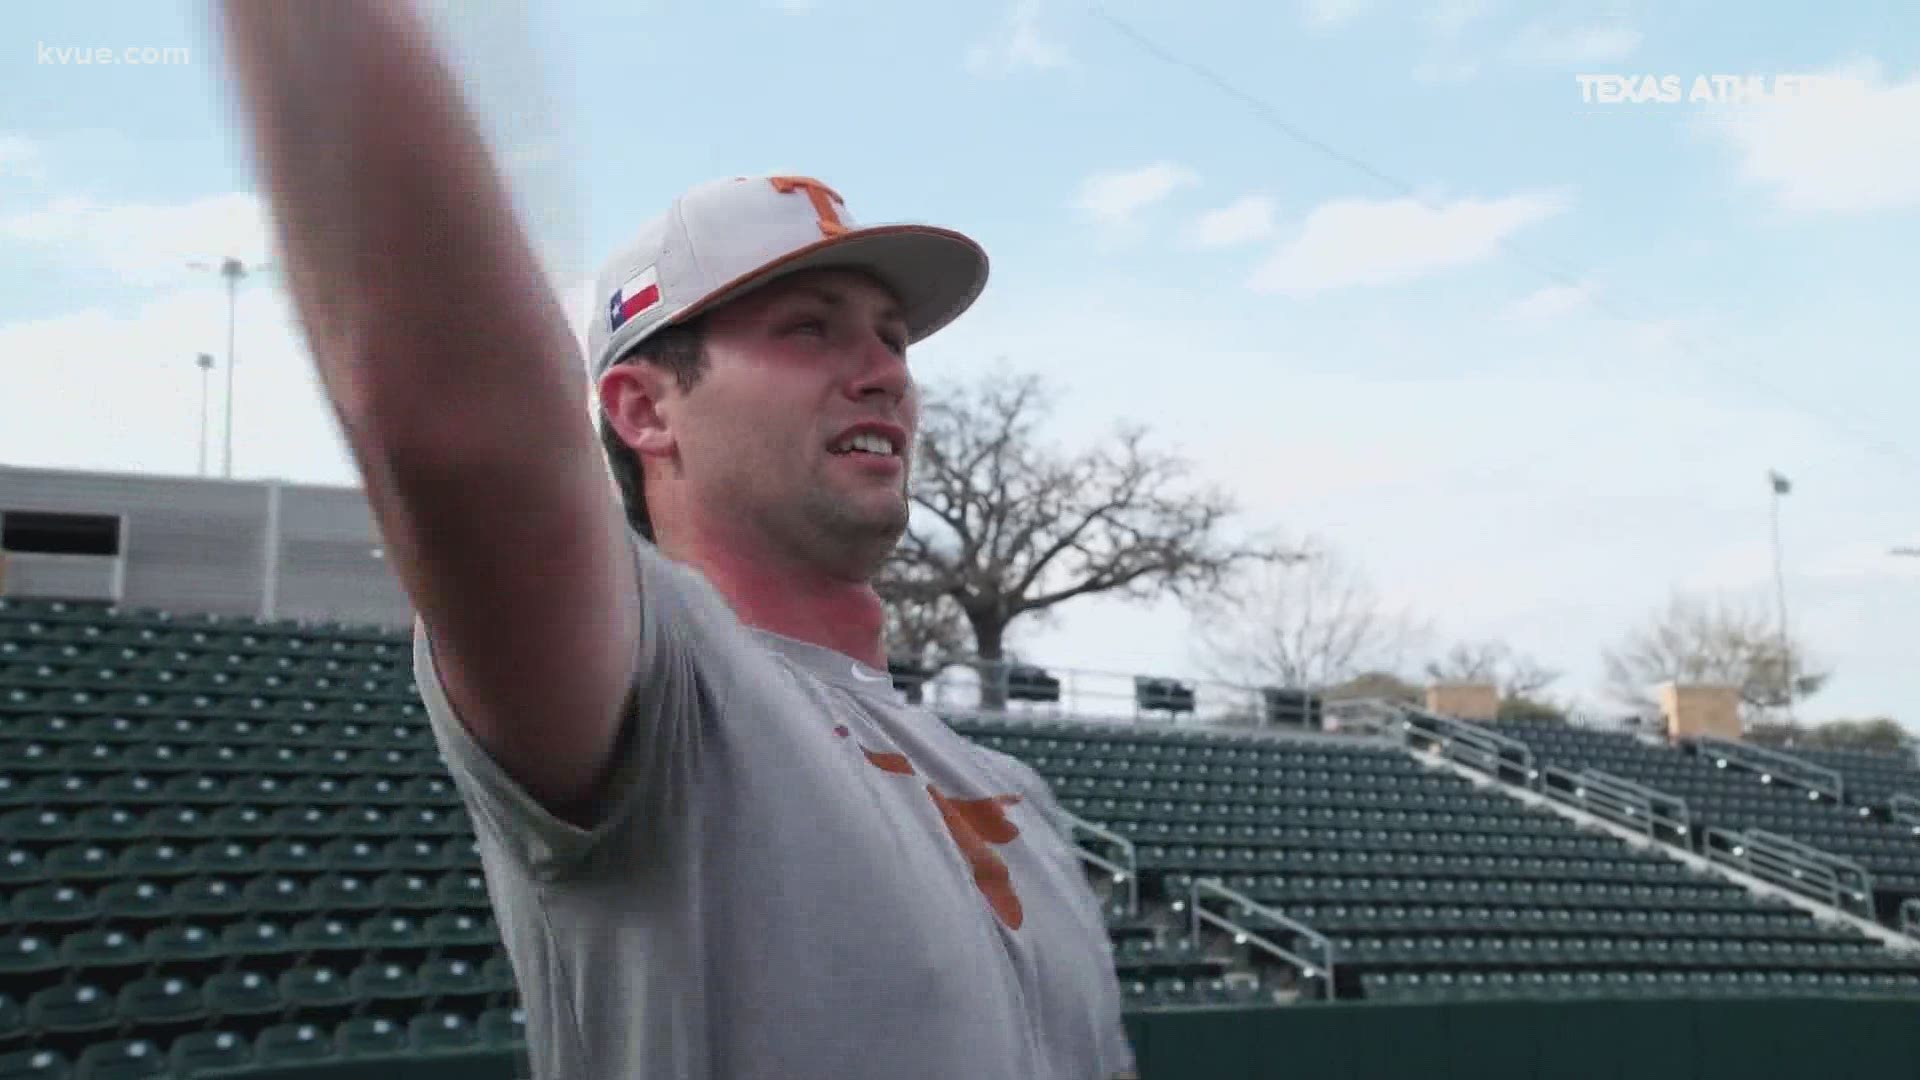 The Texas Longhorns enter baseball season ranked No. 9. You can't spell expectations without Texas!